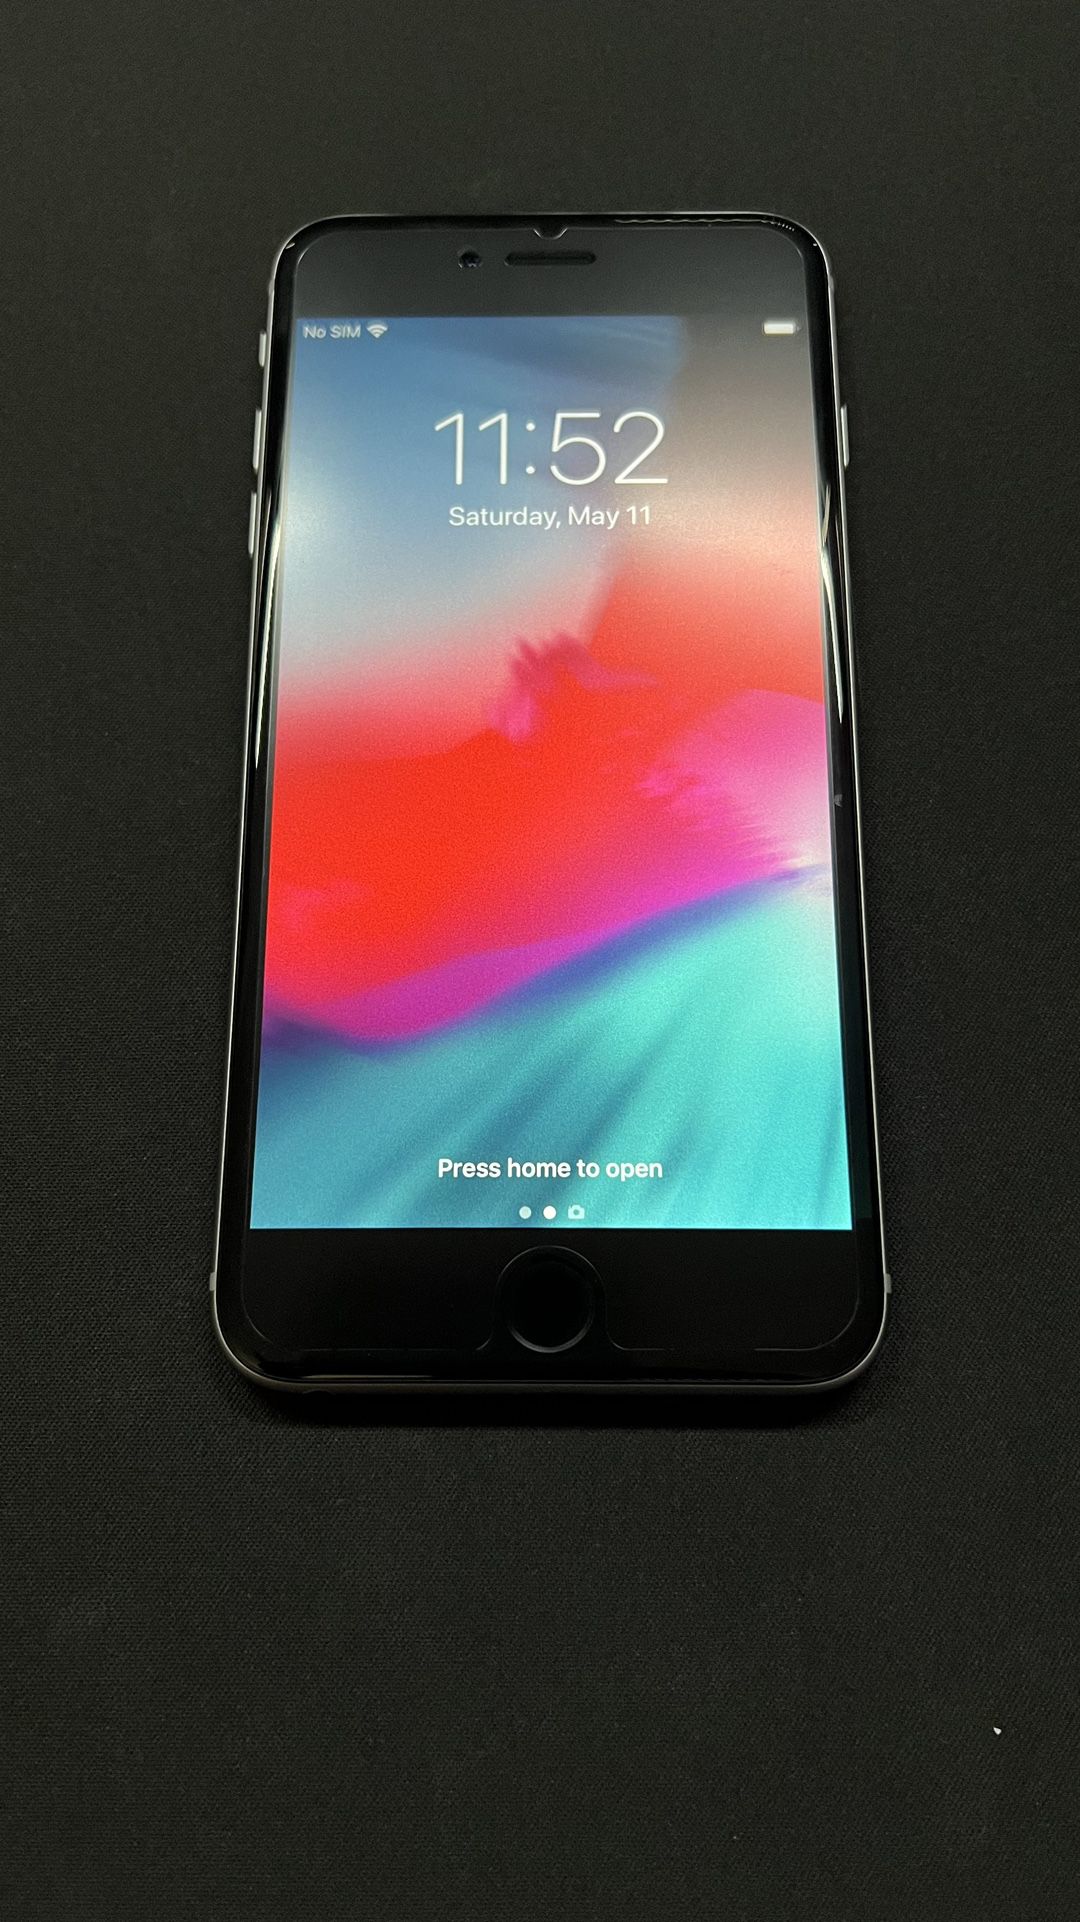 IPHONE 6 PLUS 16GB SPACE GRAY UNLOCKED EXCELLENT CONDITION